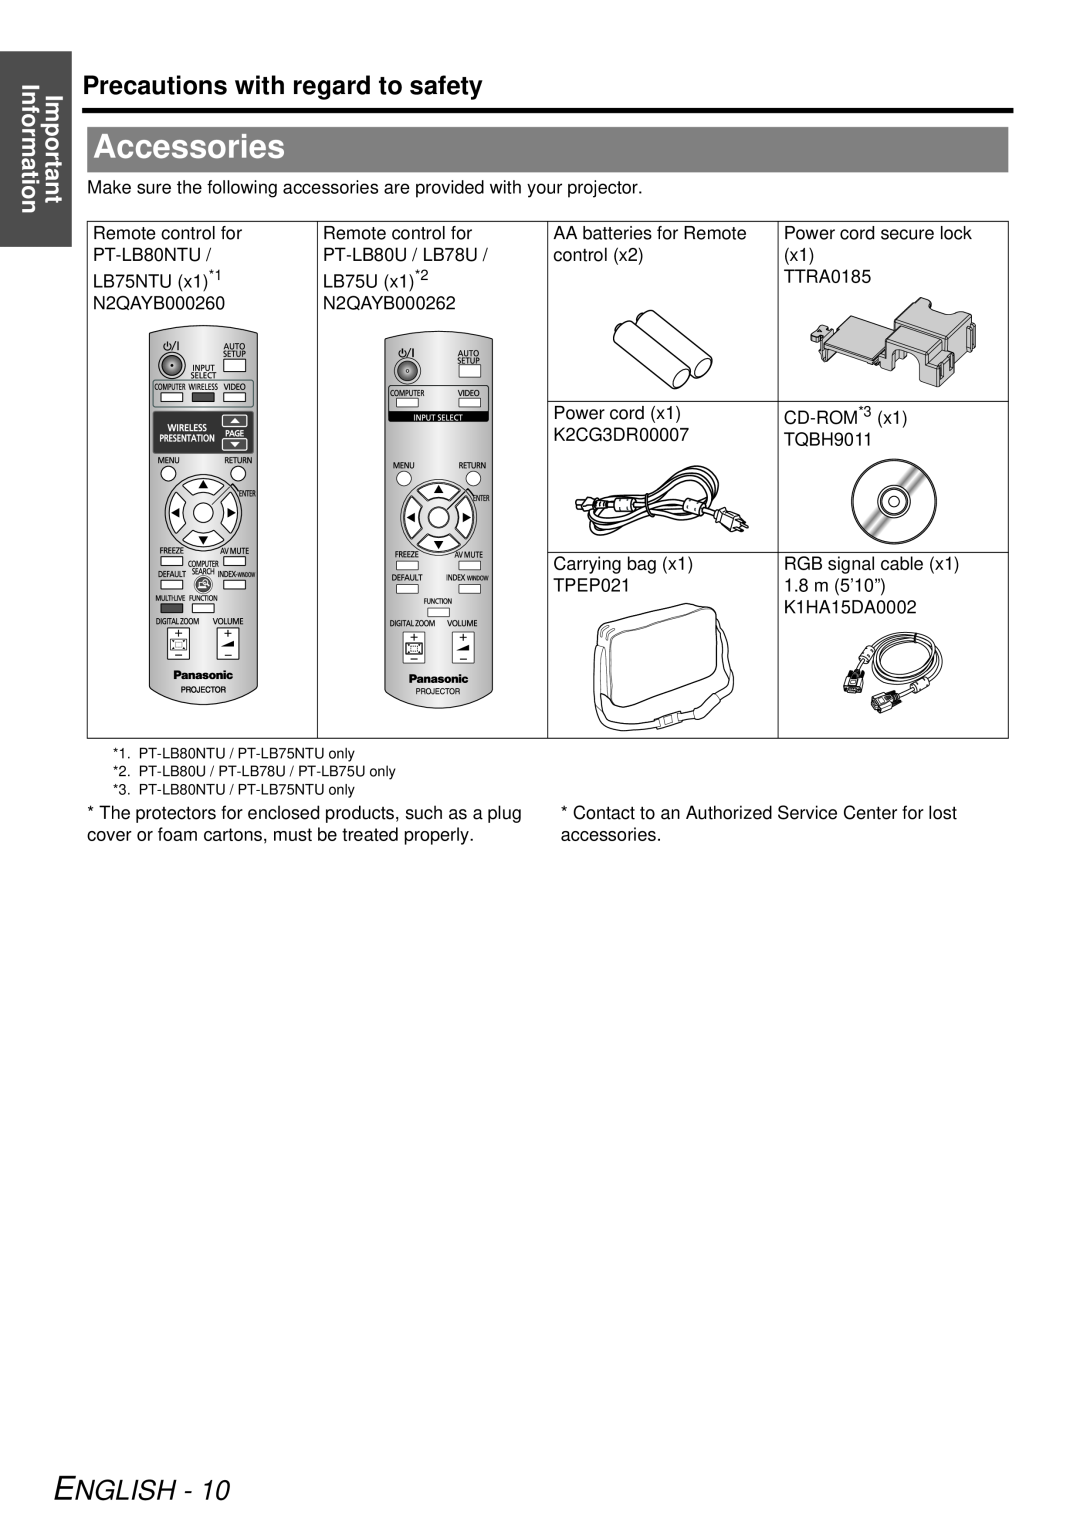 Panasonic PT-LB78U manual Accessories, English, Precautions with regard to safety, Important Information 